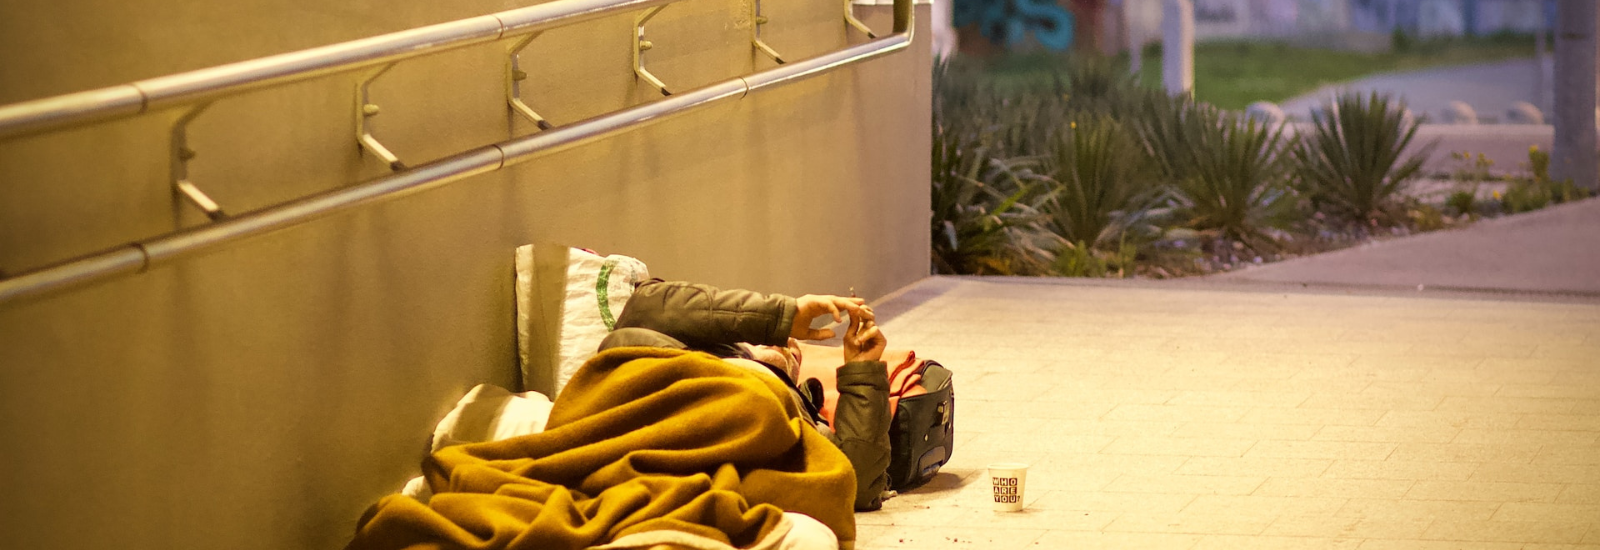 Homeless person asleep at train station banner image